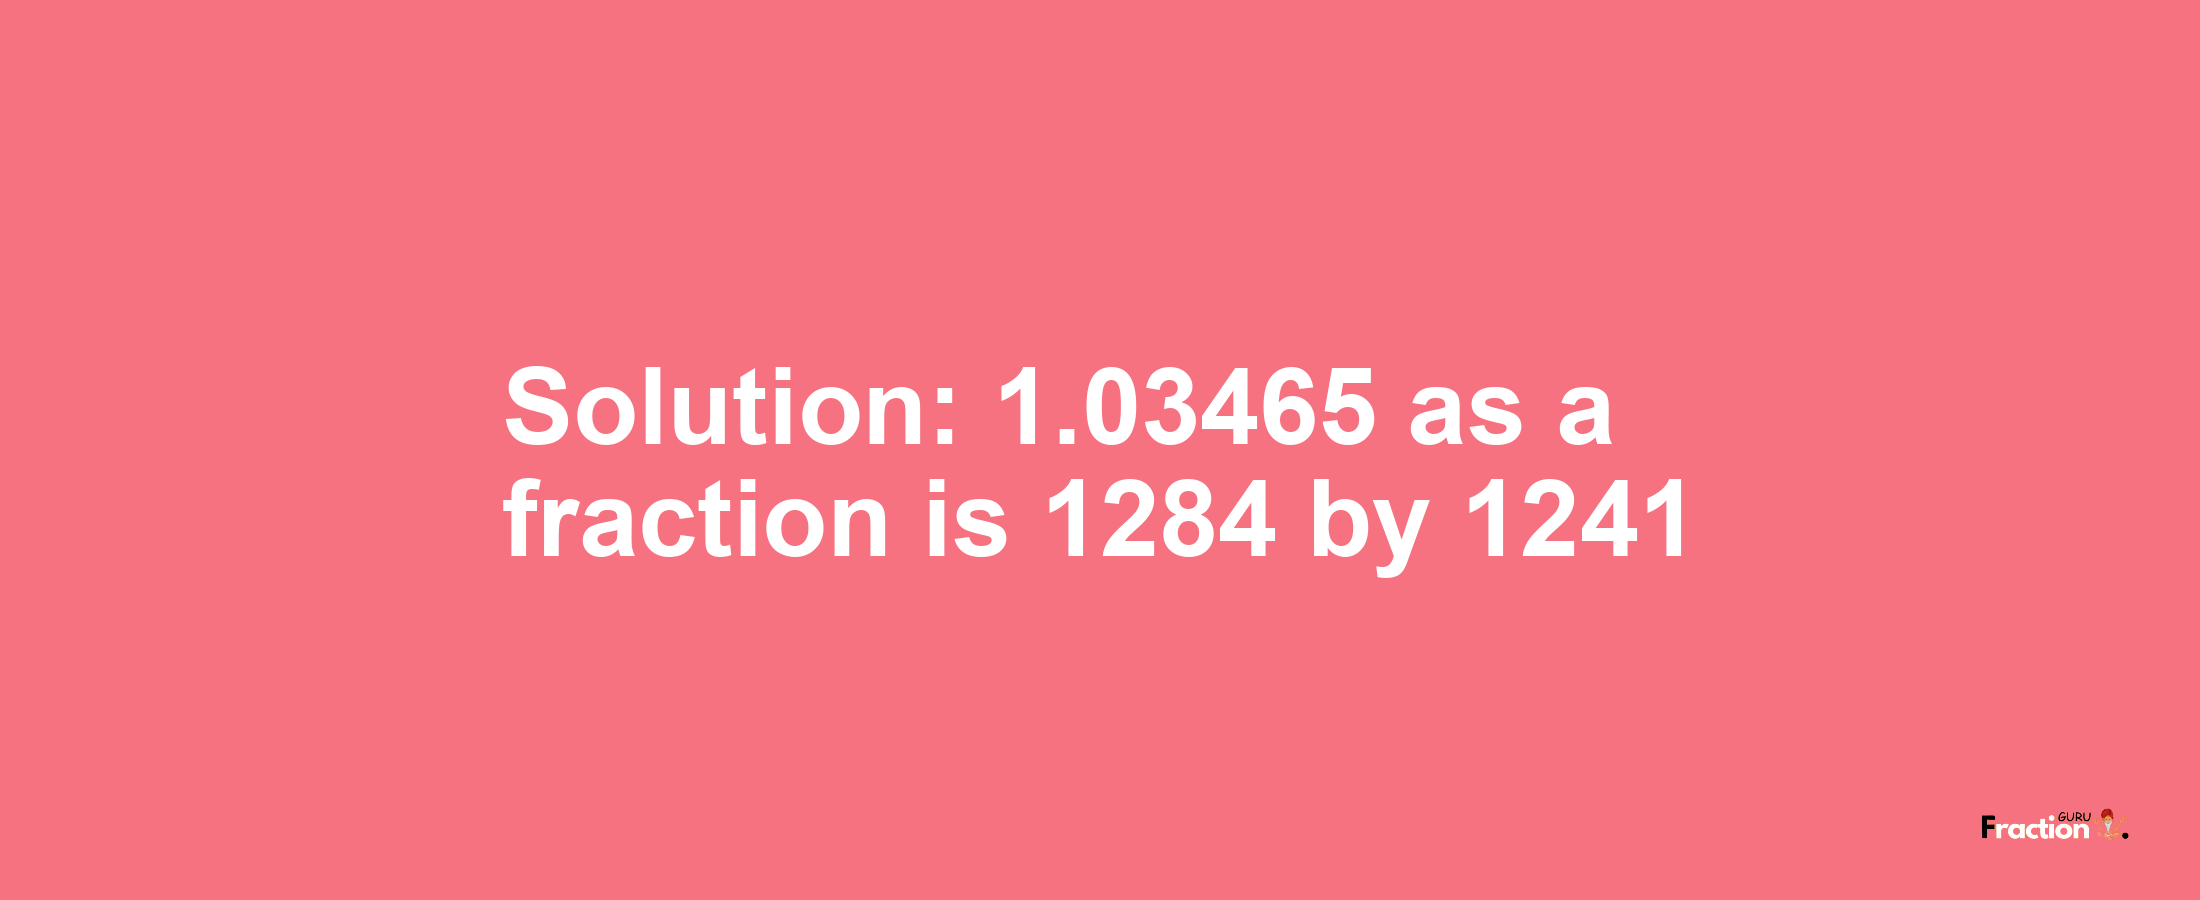 Solution:1.03465 as a fraction is 1284/1241